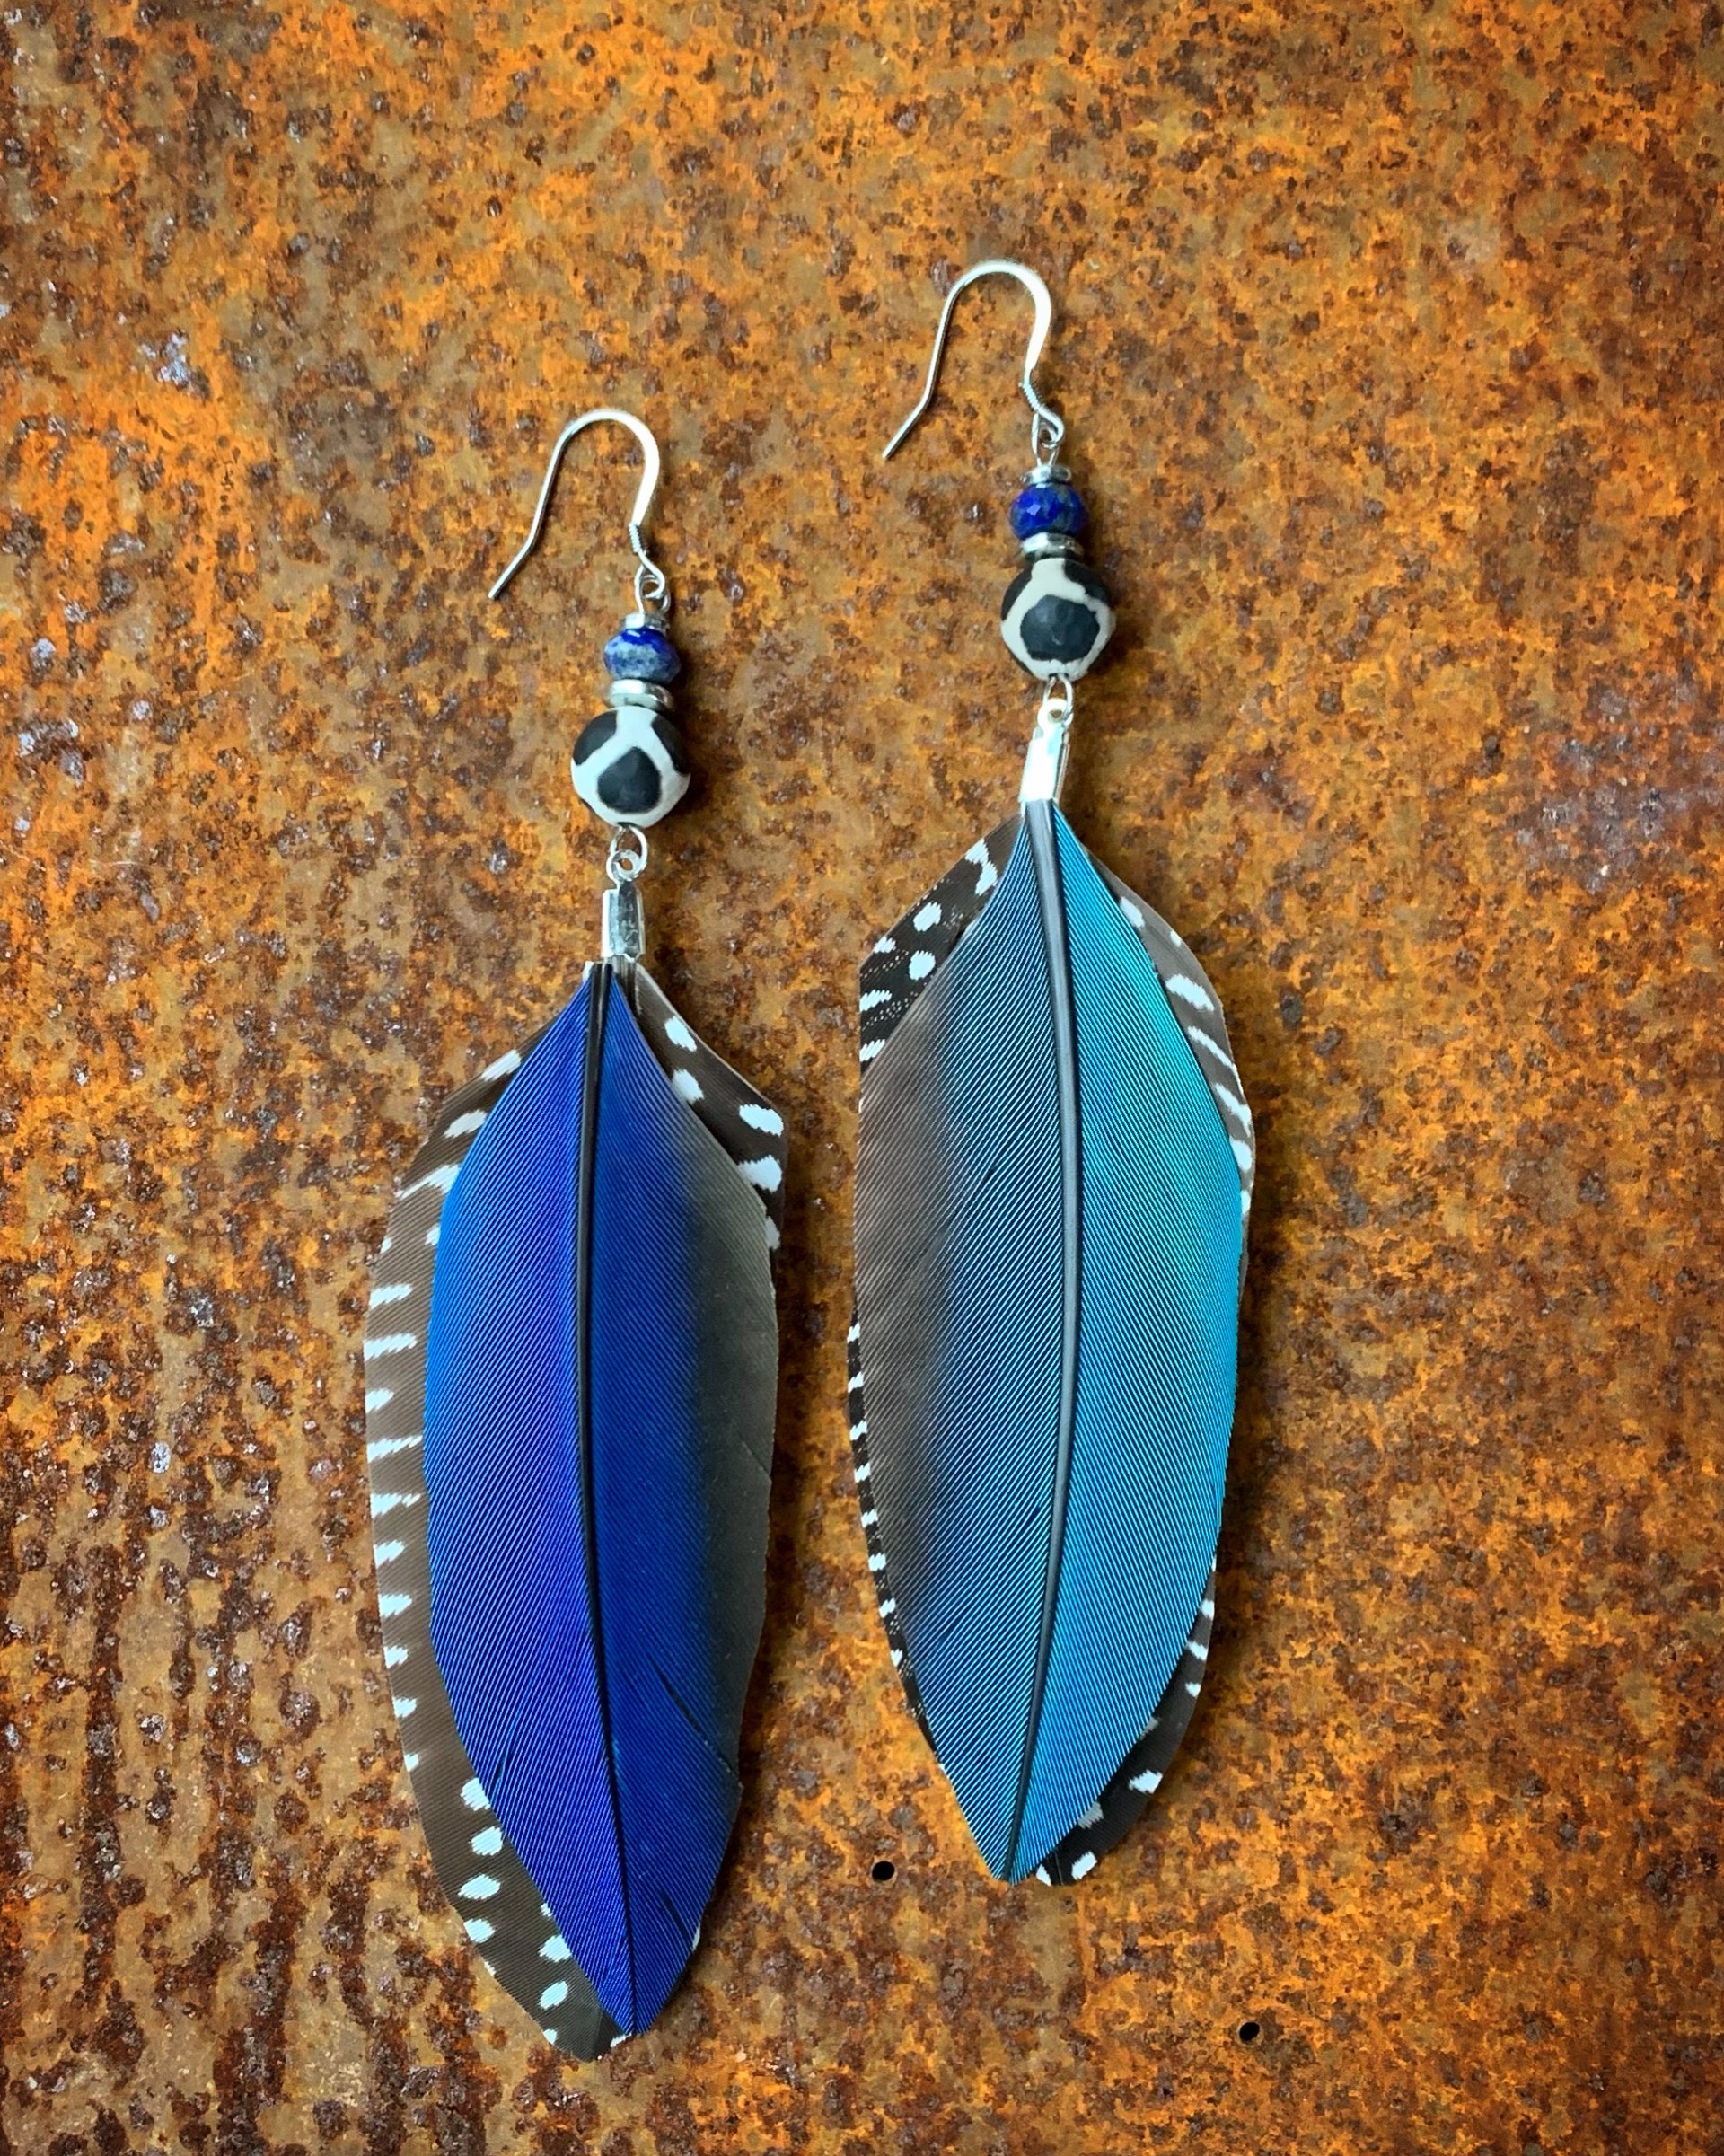 K598 Black White and Blue Feather Earrings by Kelly Ormsby